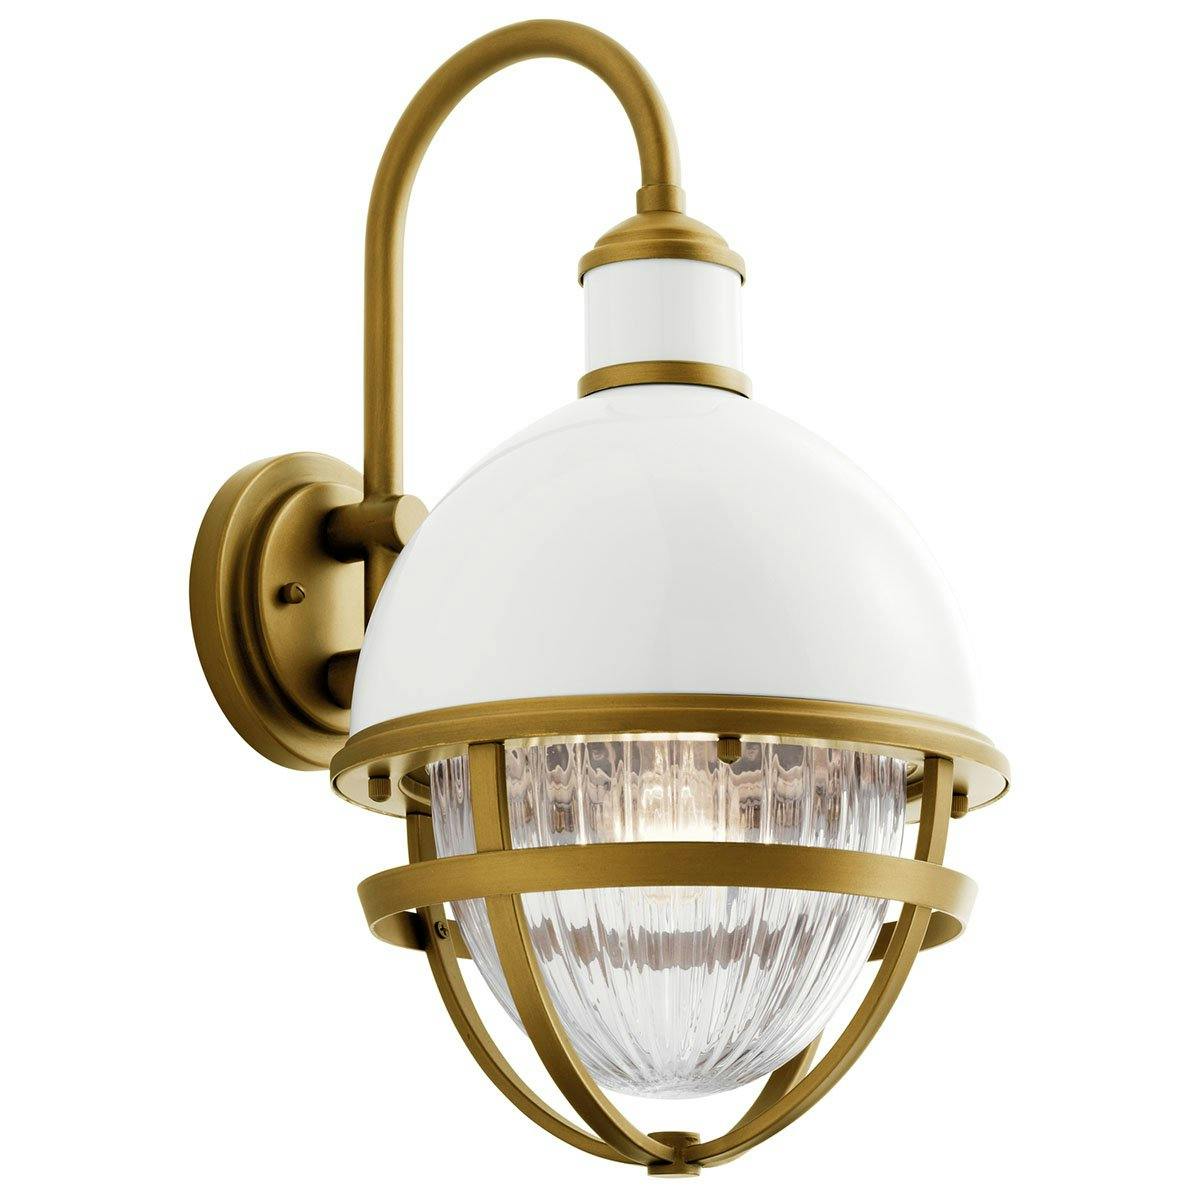 Tollis 18.50" Wall Light White and Brass on a white background